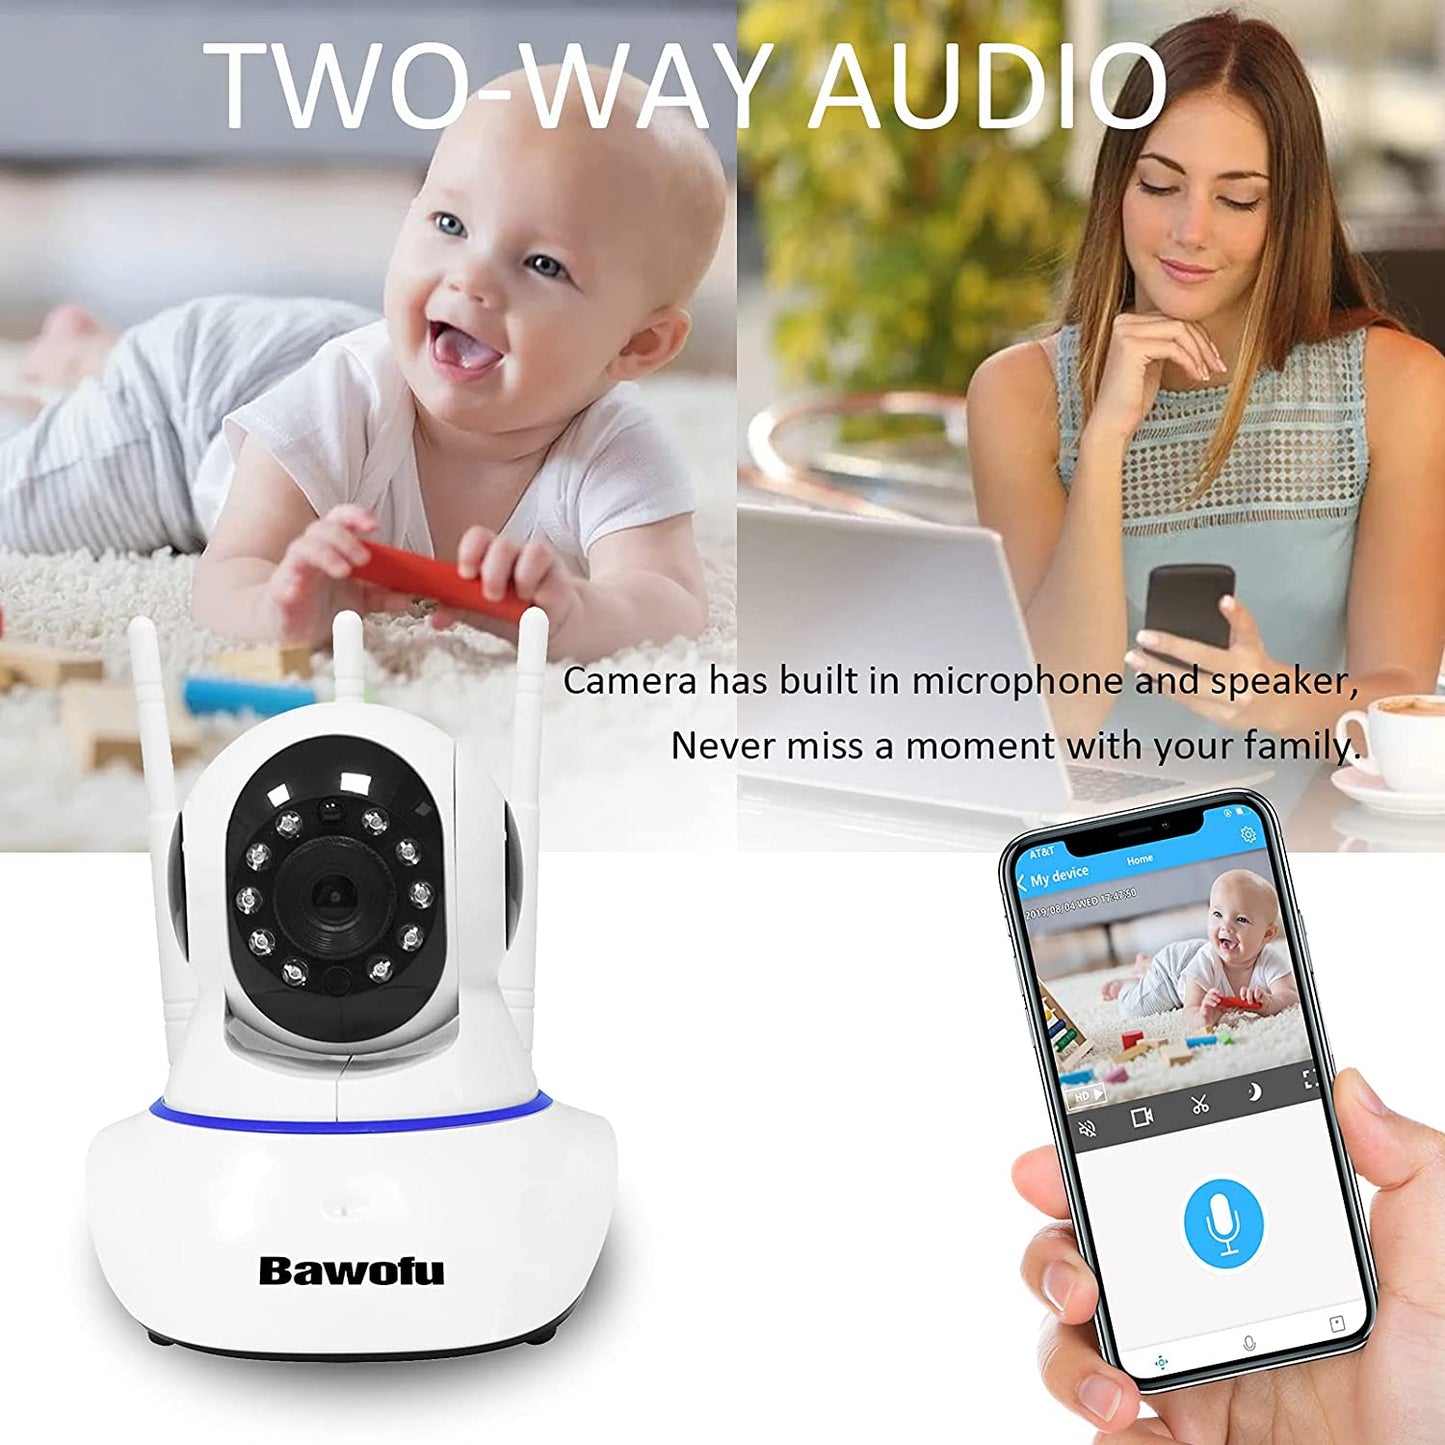 1080P Home Wireless Indoor IP Security Camera with 2 Way Audio, Support 4G Data Card Tray Expansion and USB Antenna, Free Motion Alerts Night Vision for Pet/Nanny Compatible SD Card up to 128G